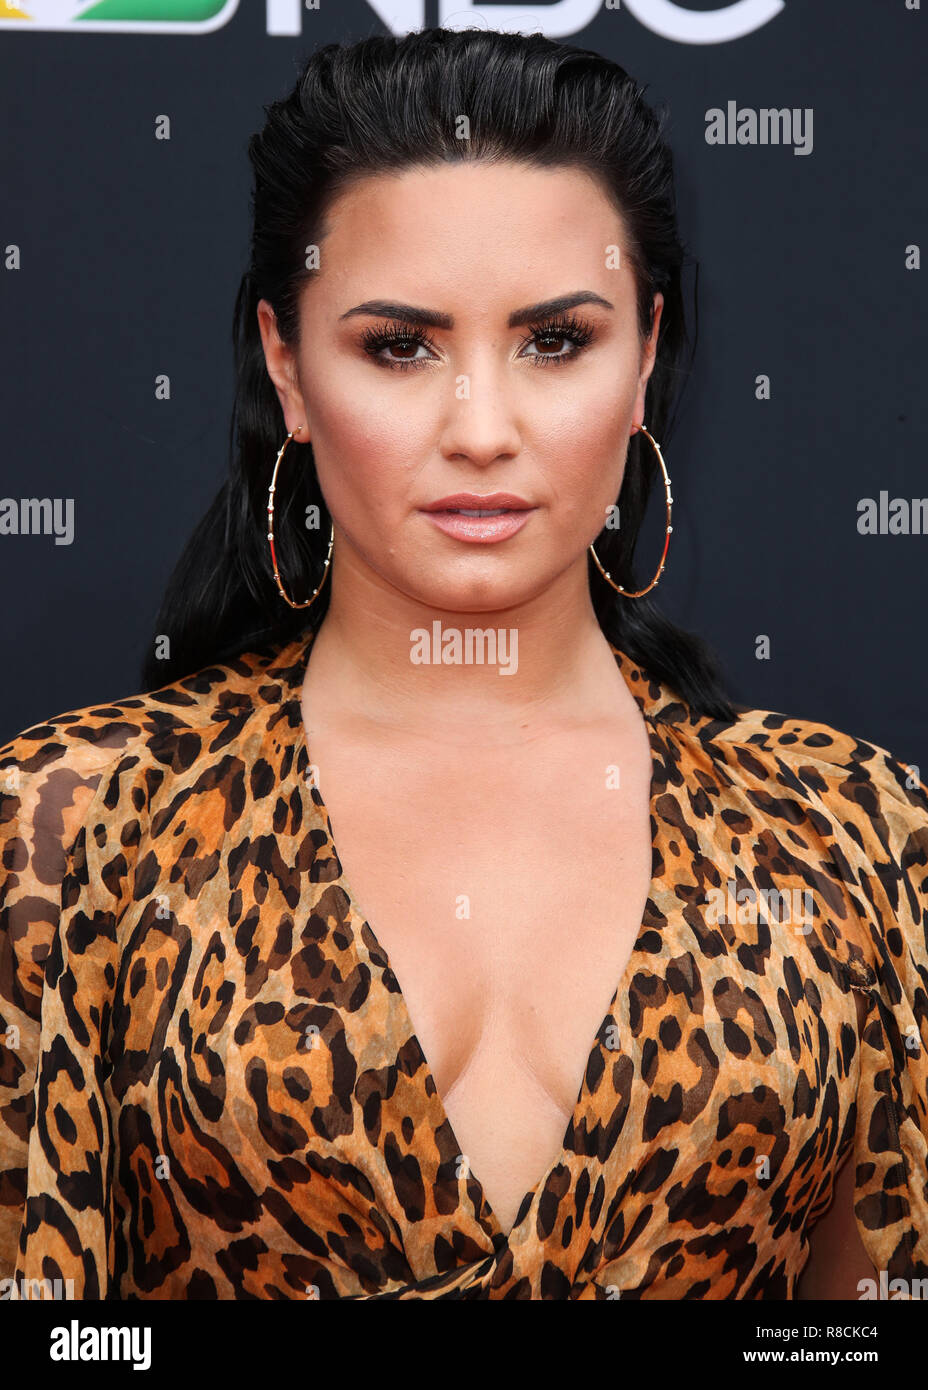 LAS VEGAS, NV, USA - MAY 20: Demi Lovato at the 2018 Billboard Music Awards held at the MGM Grand Garden Arena on May 20, 2018 in Las Vegas, Nevada, United States. (Photo by Xavier Collin/Image Press Agency) Stock Photo